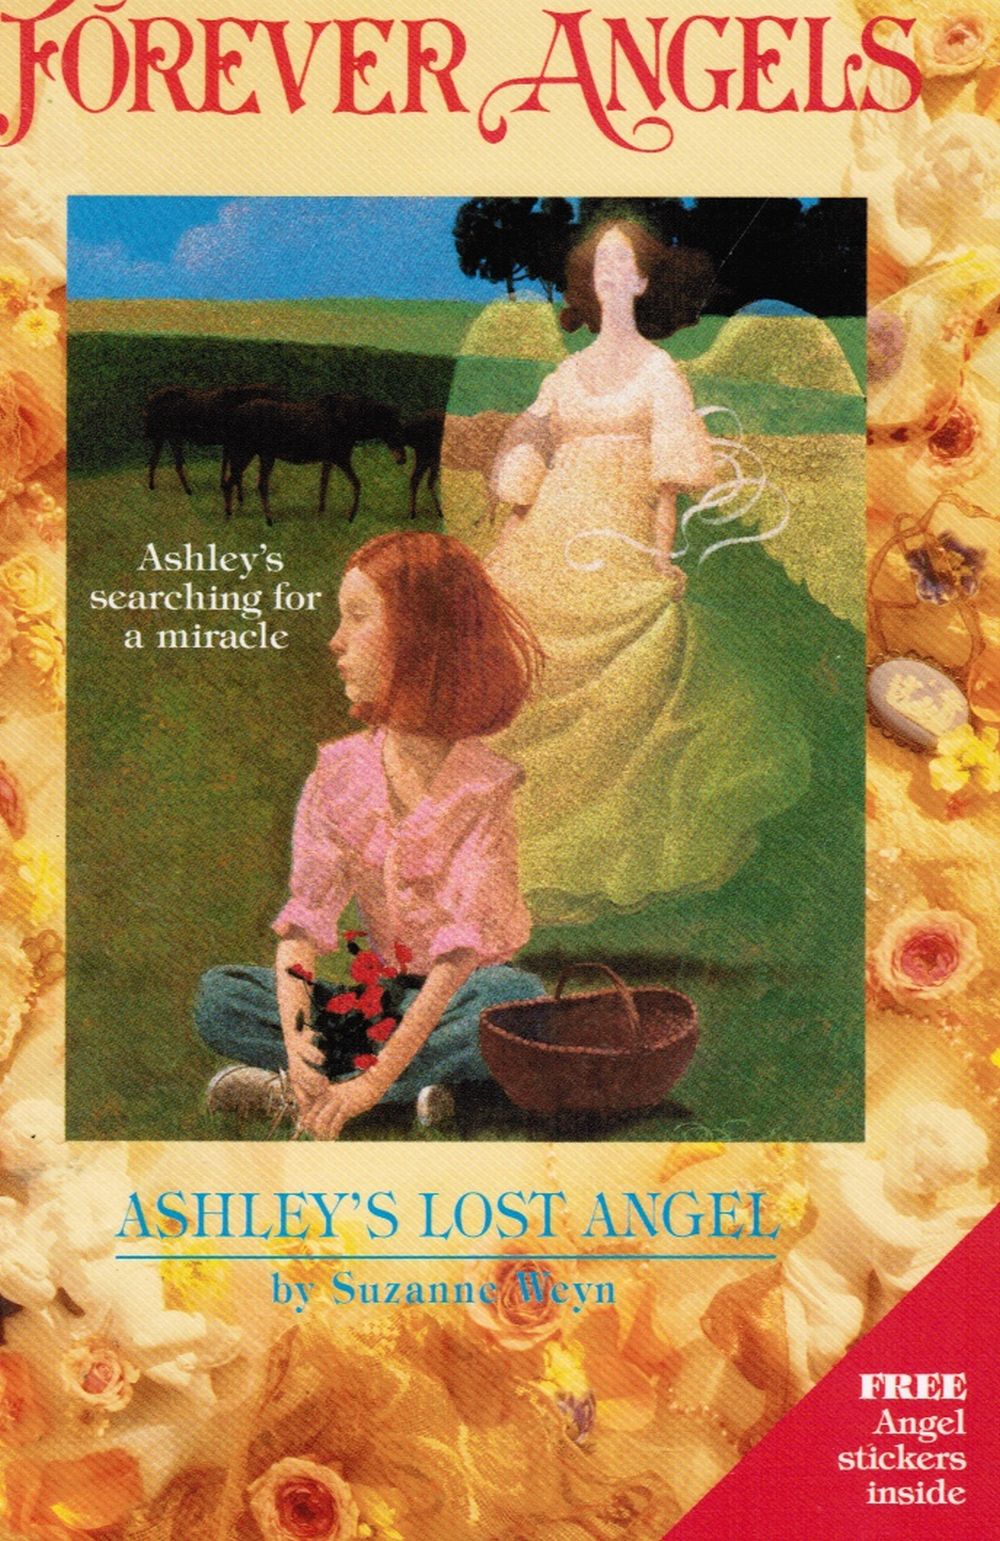 WEYN, SUZANNE - Ashley's Lost Angel (with Stickers)